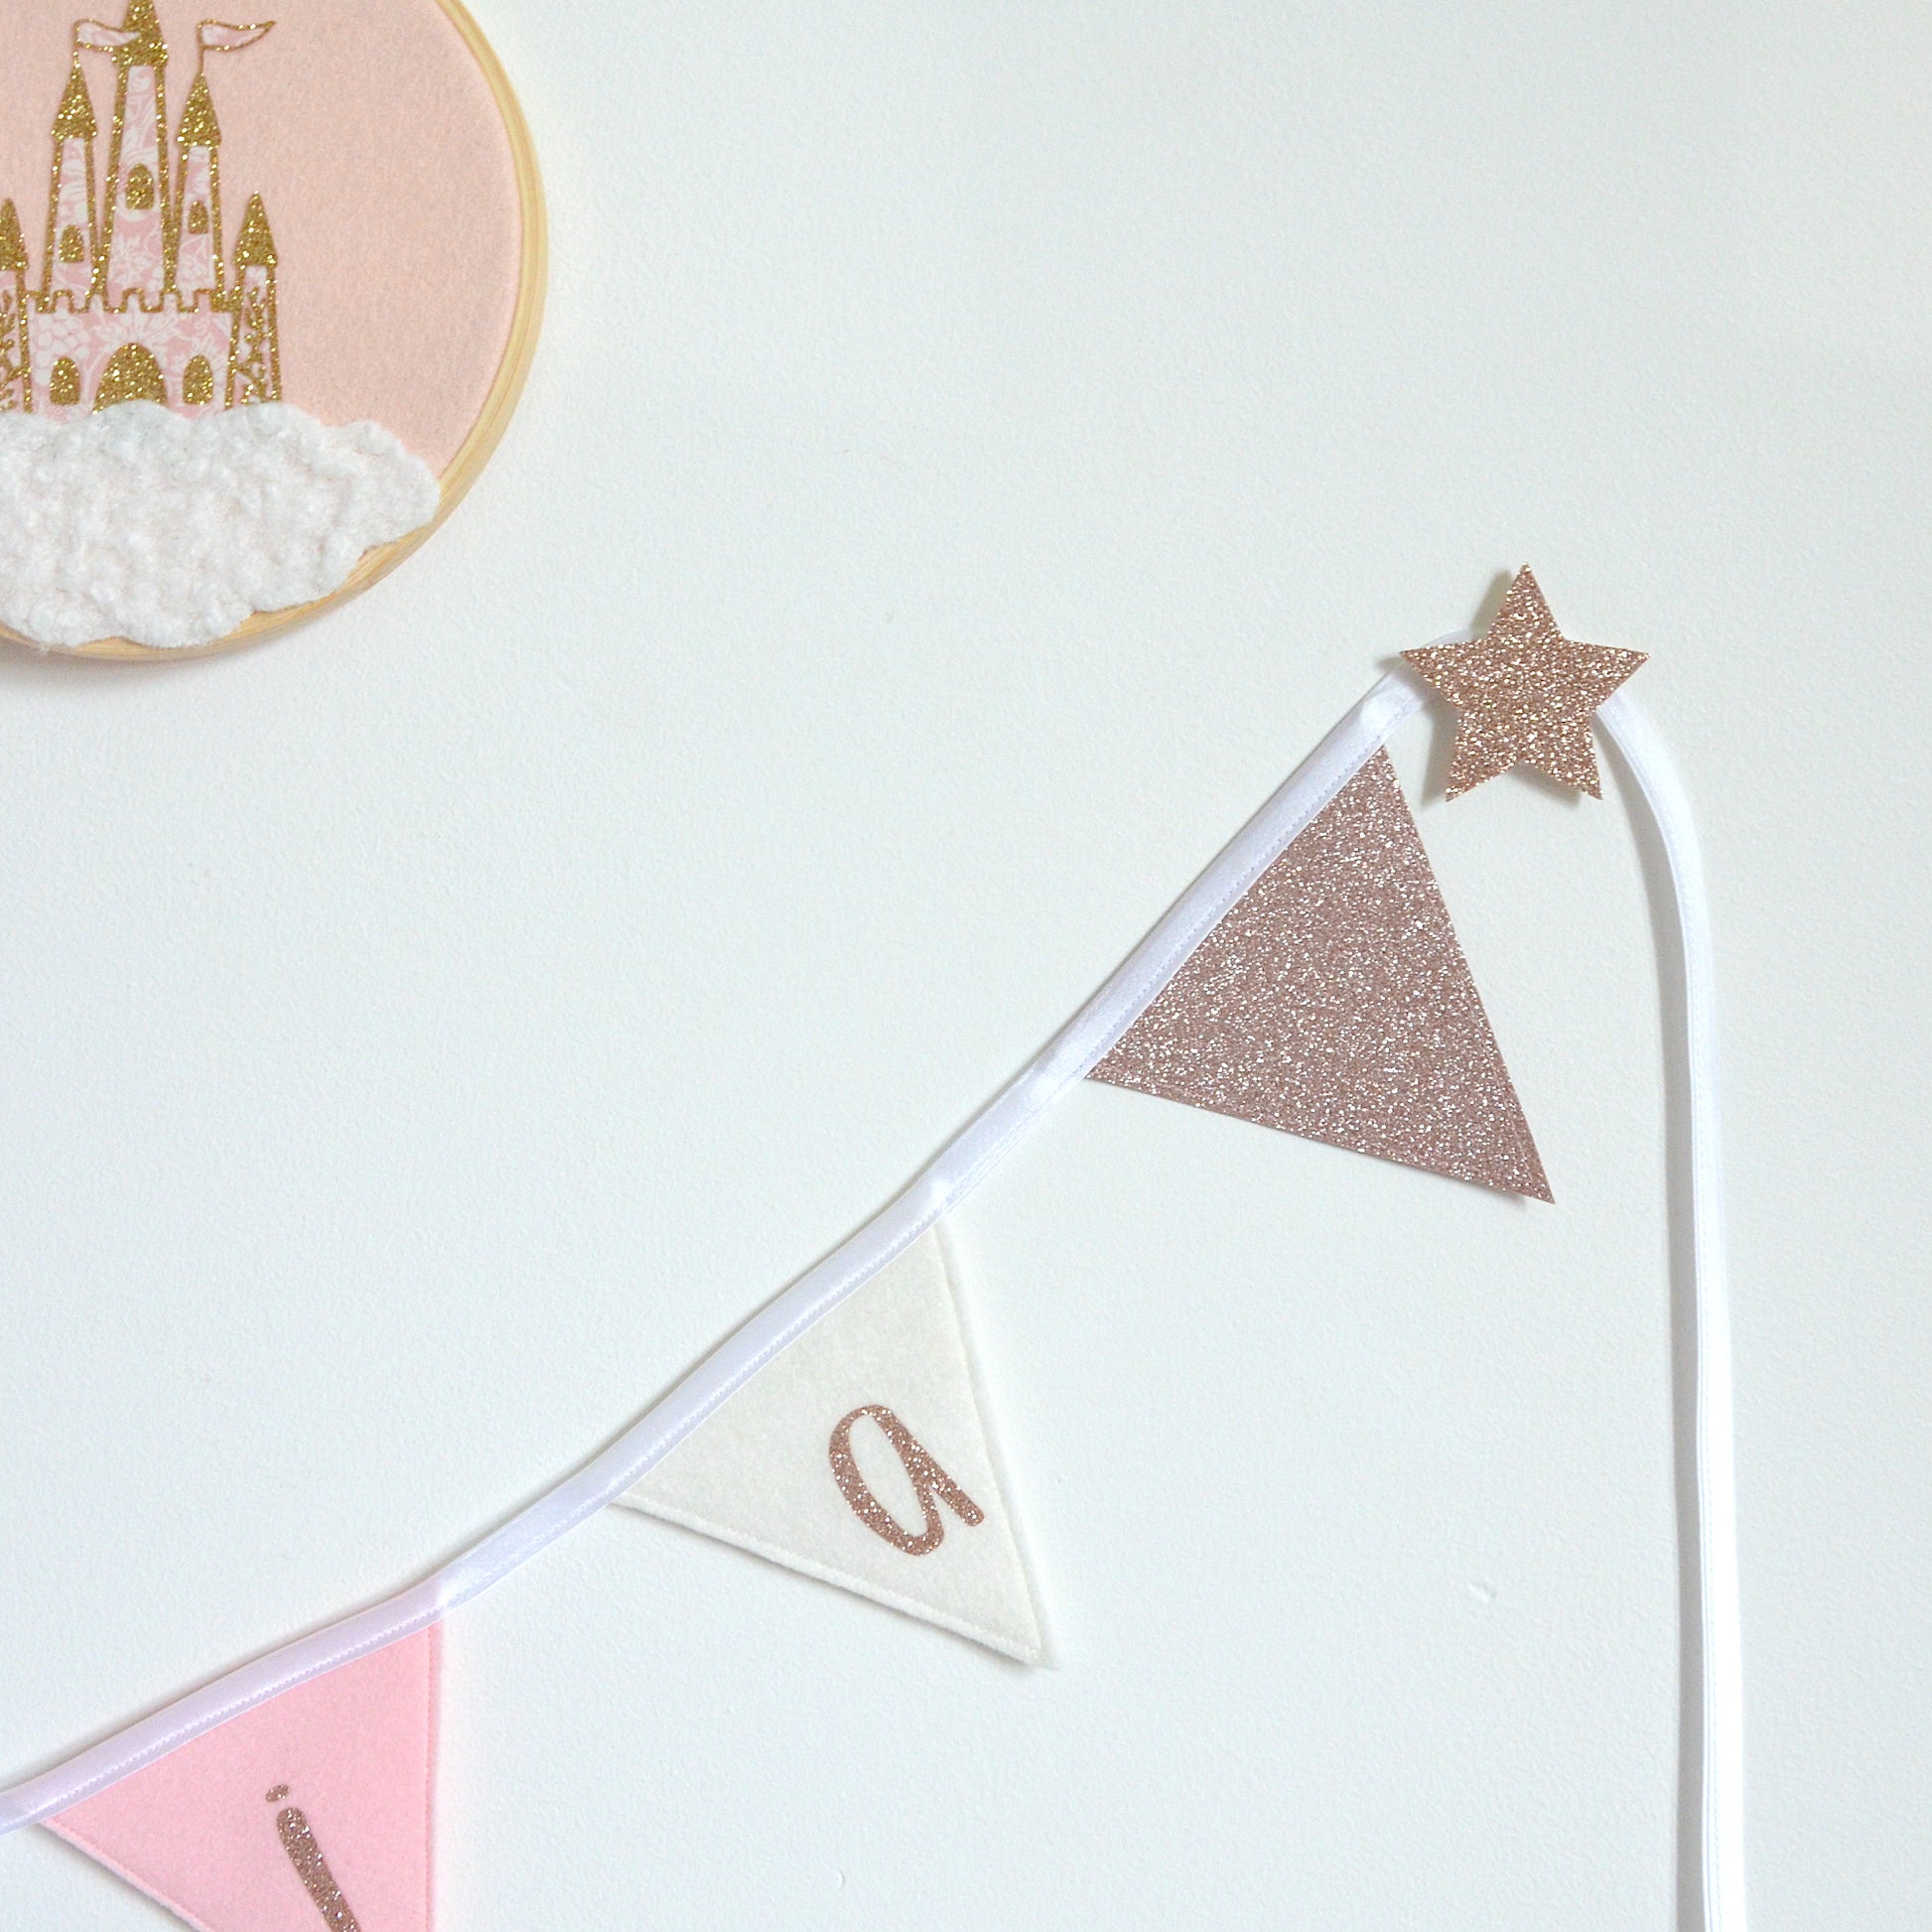 how to hang bunting. Sticky wall hooks